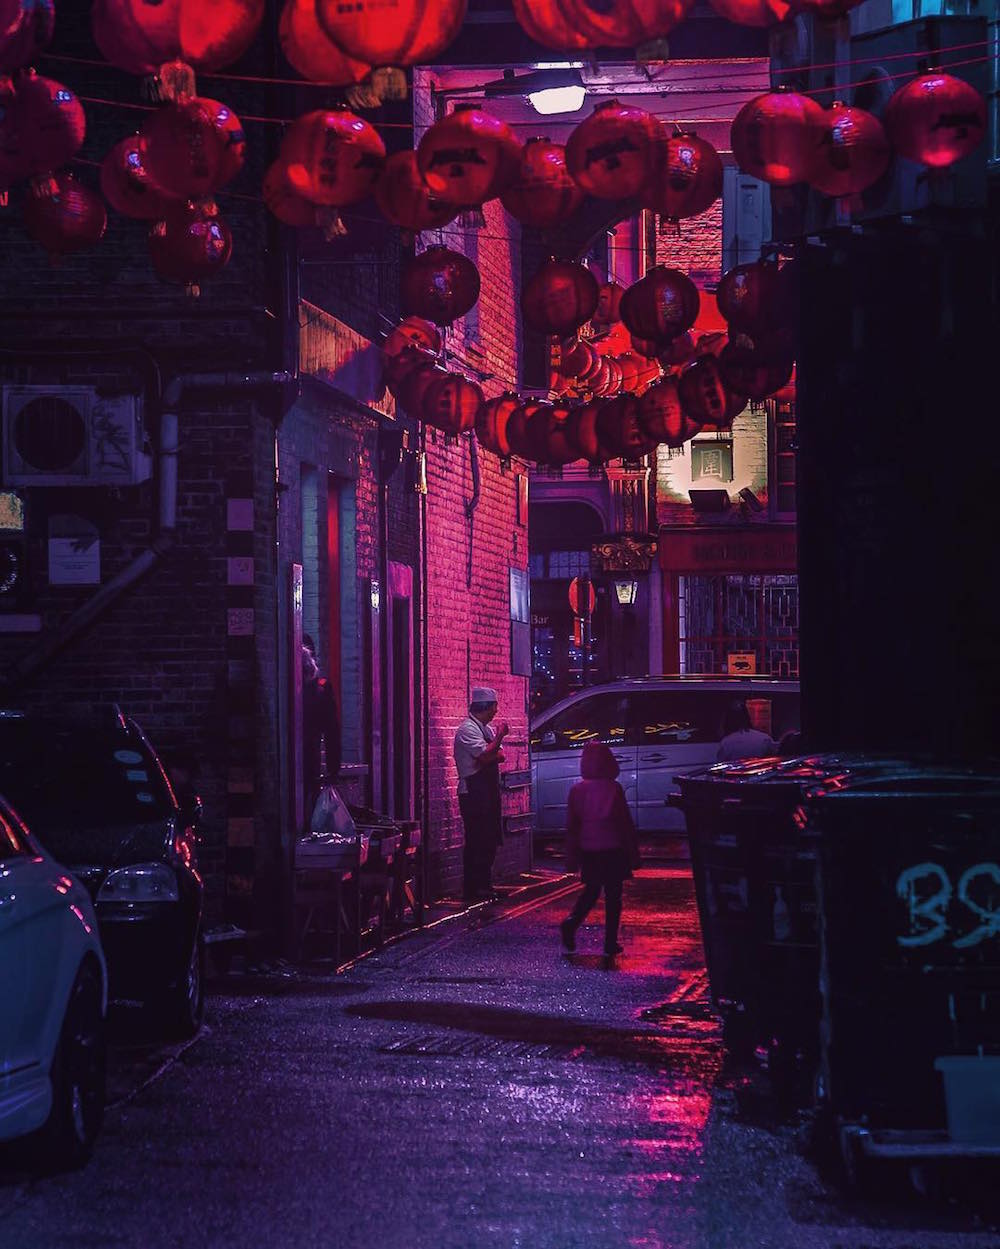 Amazing Neon Photos of Tokyo's Colorful Night Life